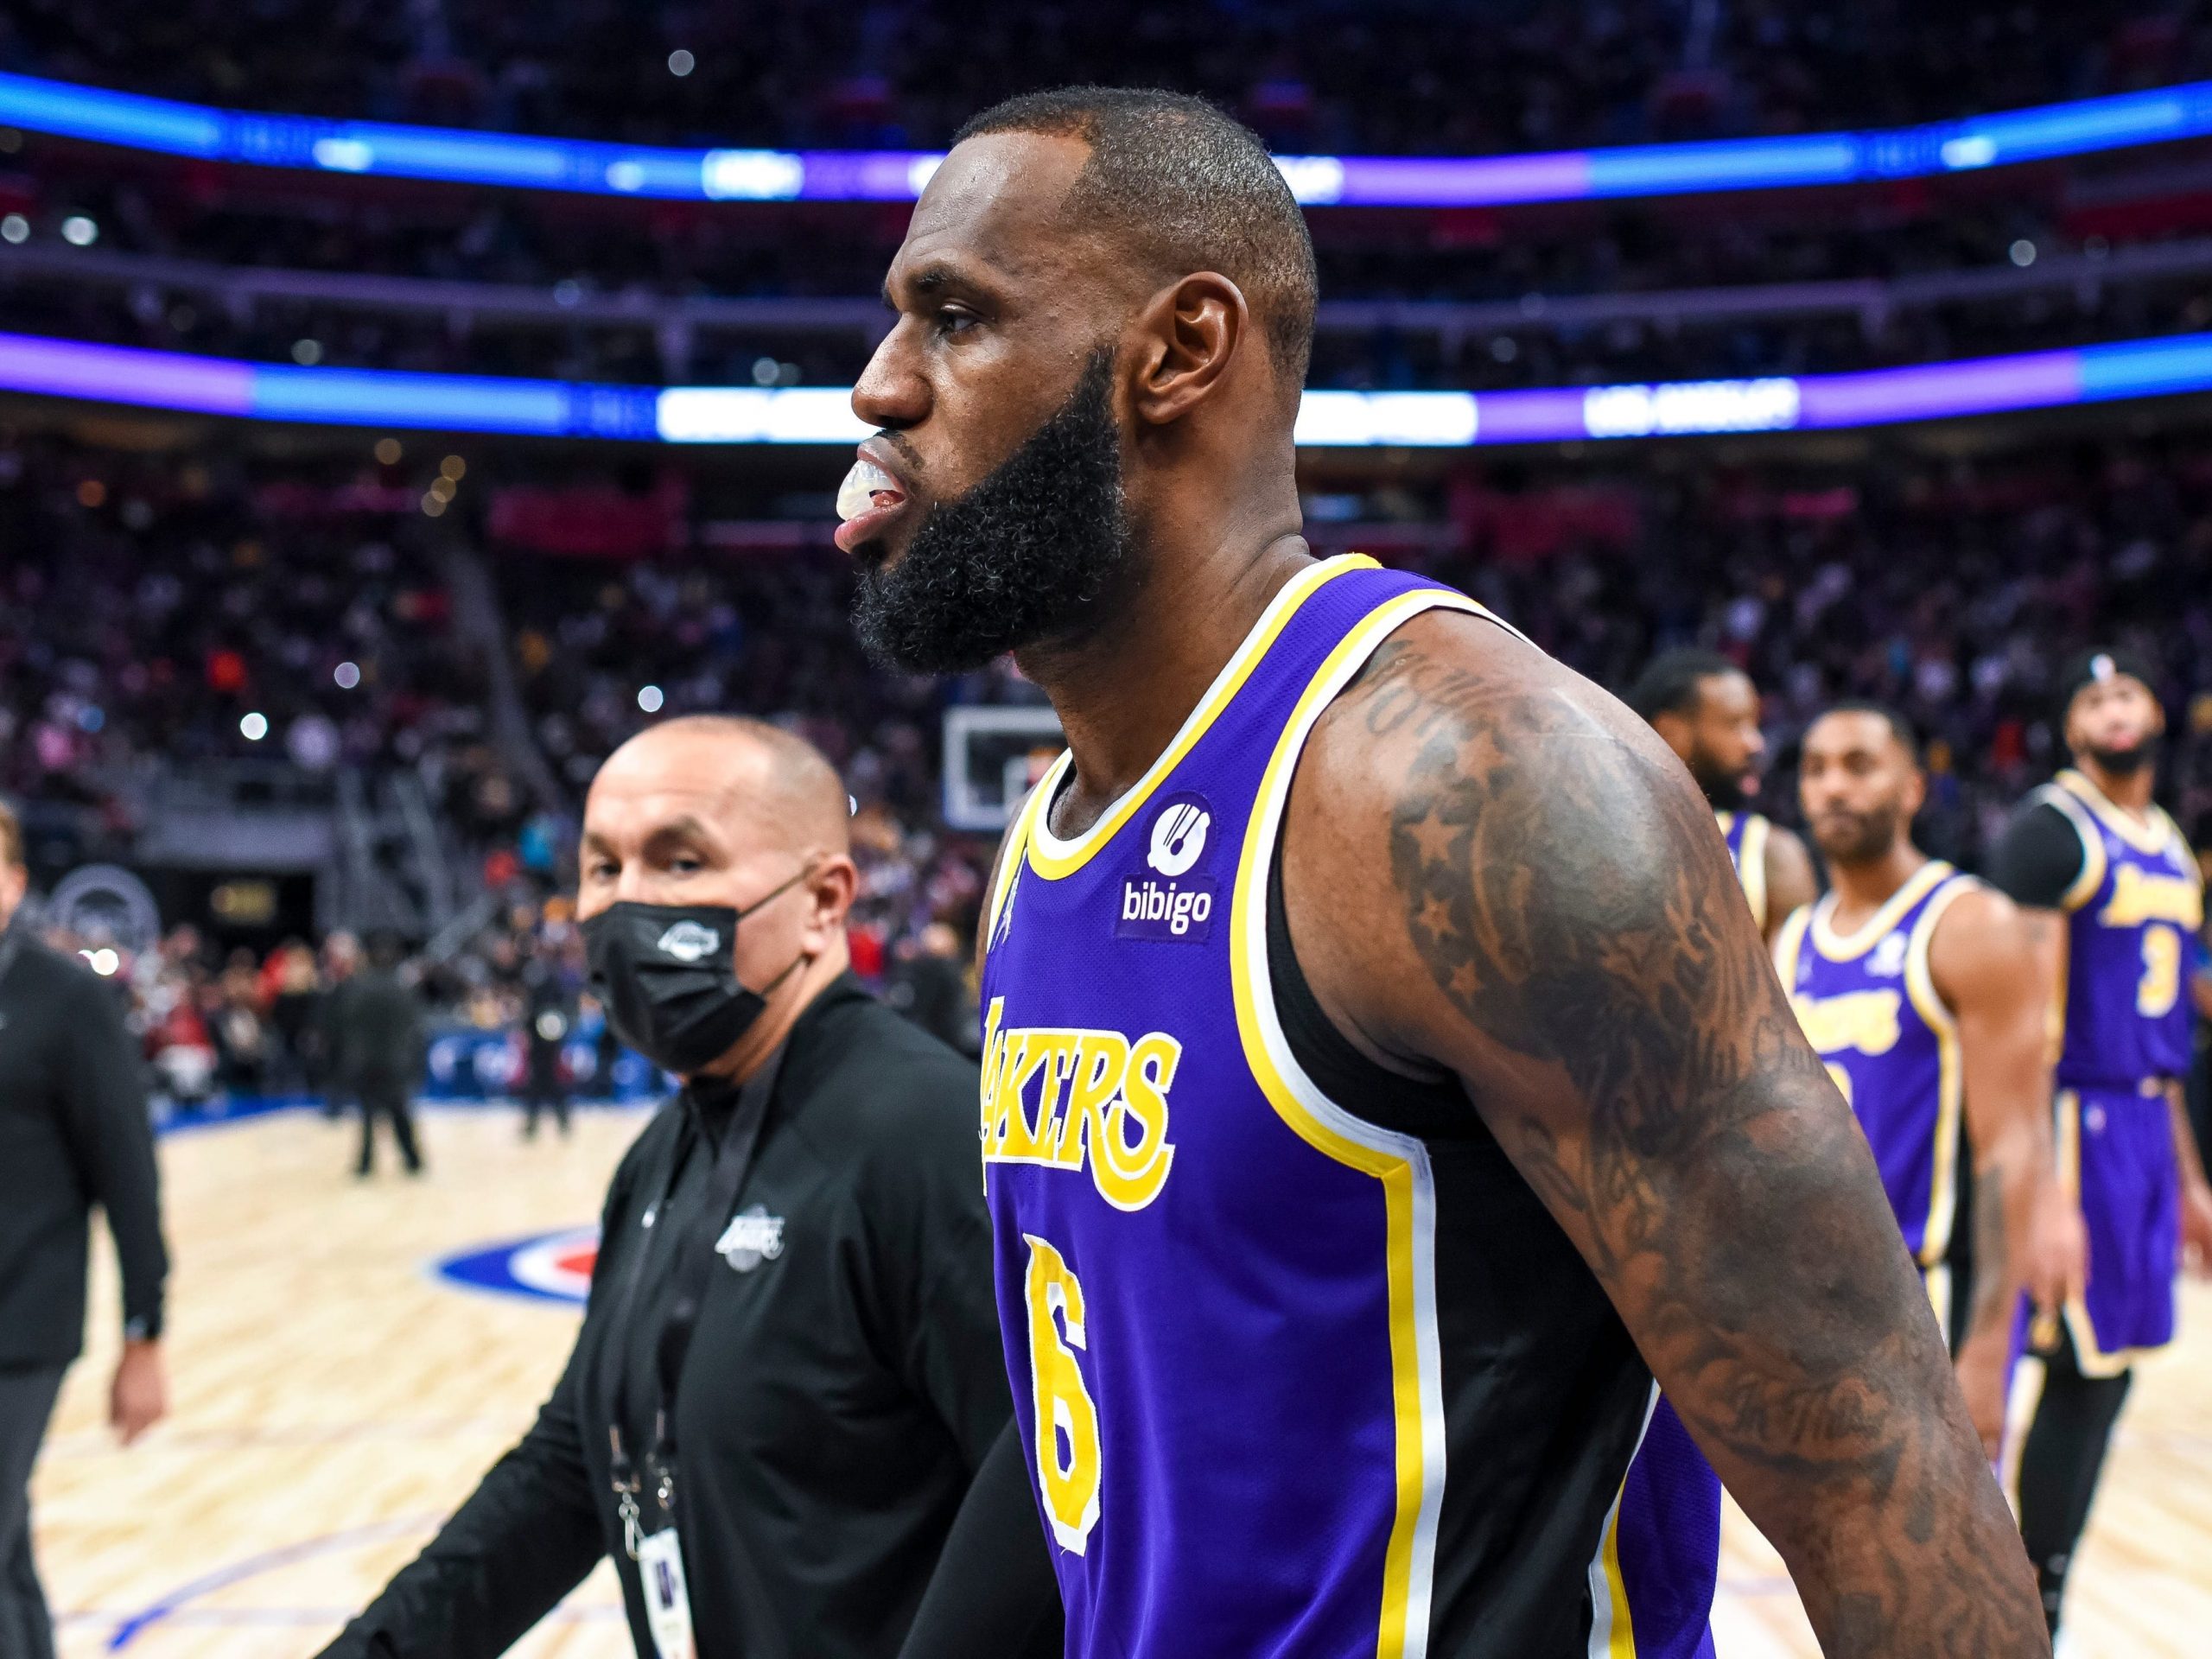 LeBron James is ejected during the Lakers v Pistons game